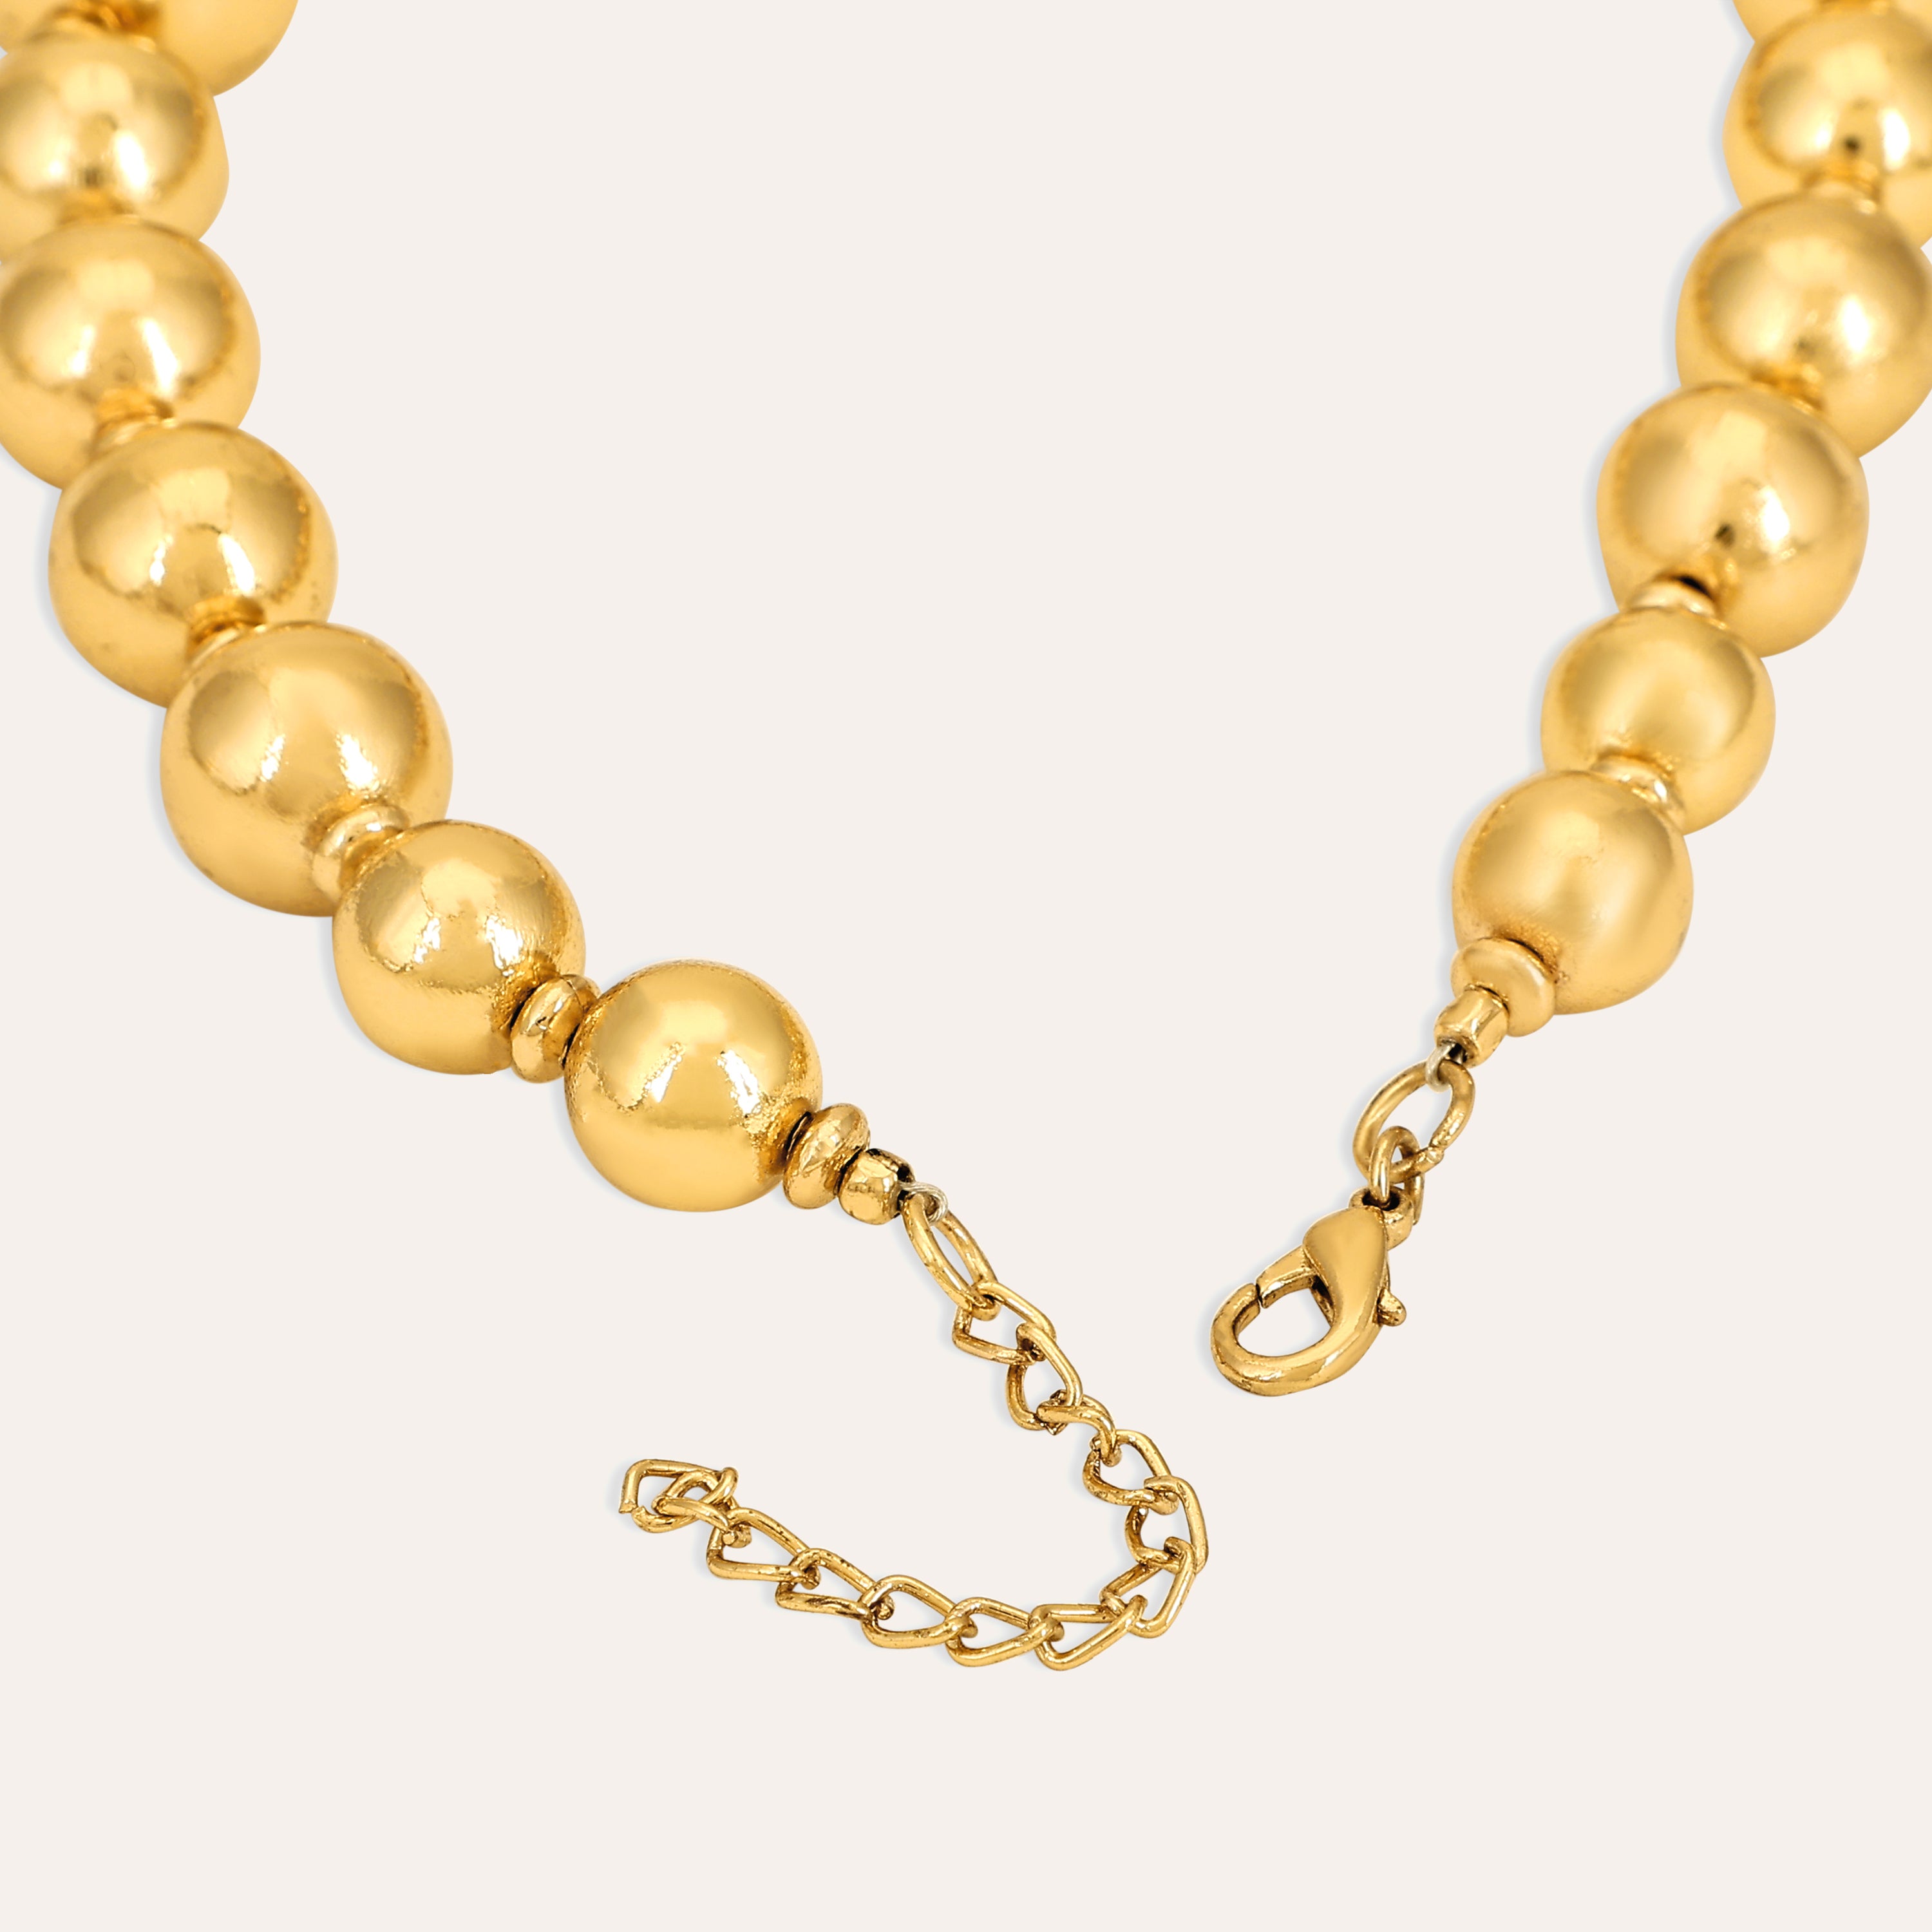 TFC Bold Beads Gold Plated Necklace-Enhance your elegance with our collection of gold-plated necklaces for women. Choose from stunning pendant necklaces, chic choker necklaces, and trendy layered necklaces. Our sleek and dainty designs are both affordable and anti-tarnish, ensuring lasting beauty. Enjoy the cheapest fashion jewellery, lightweight and stylish- only at The Fun Company